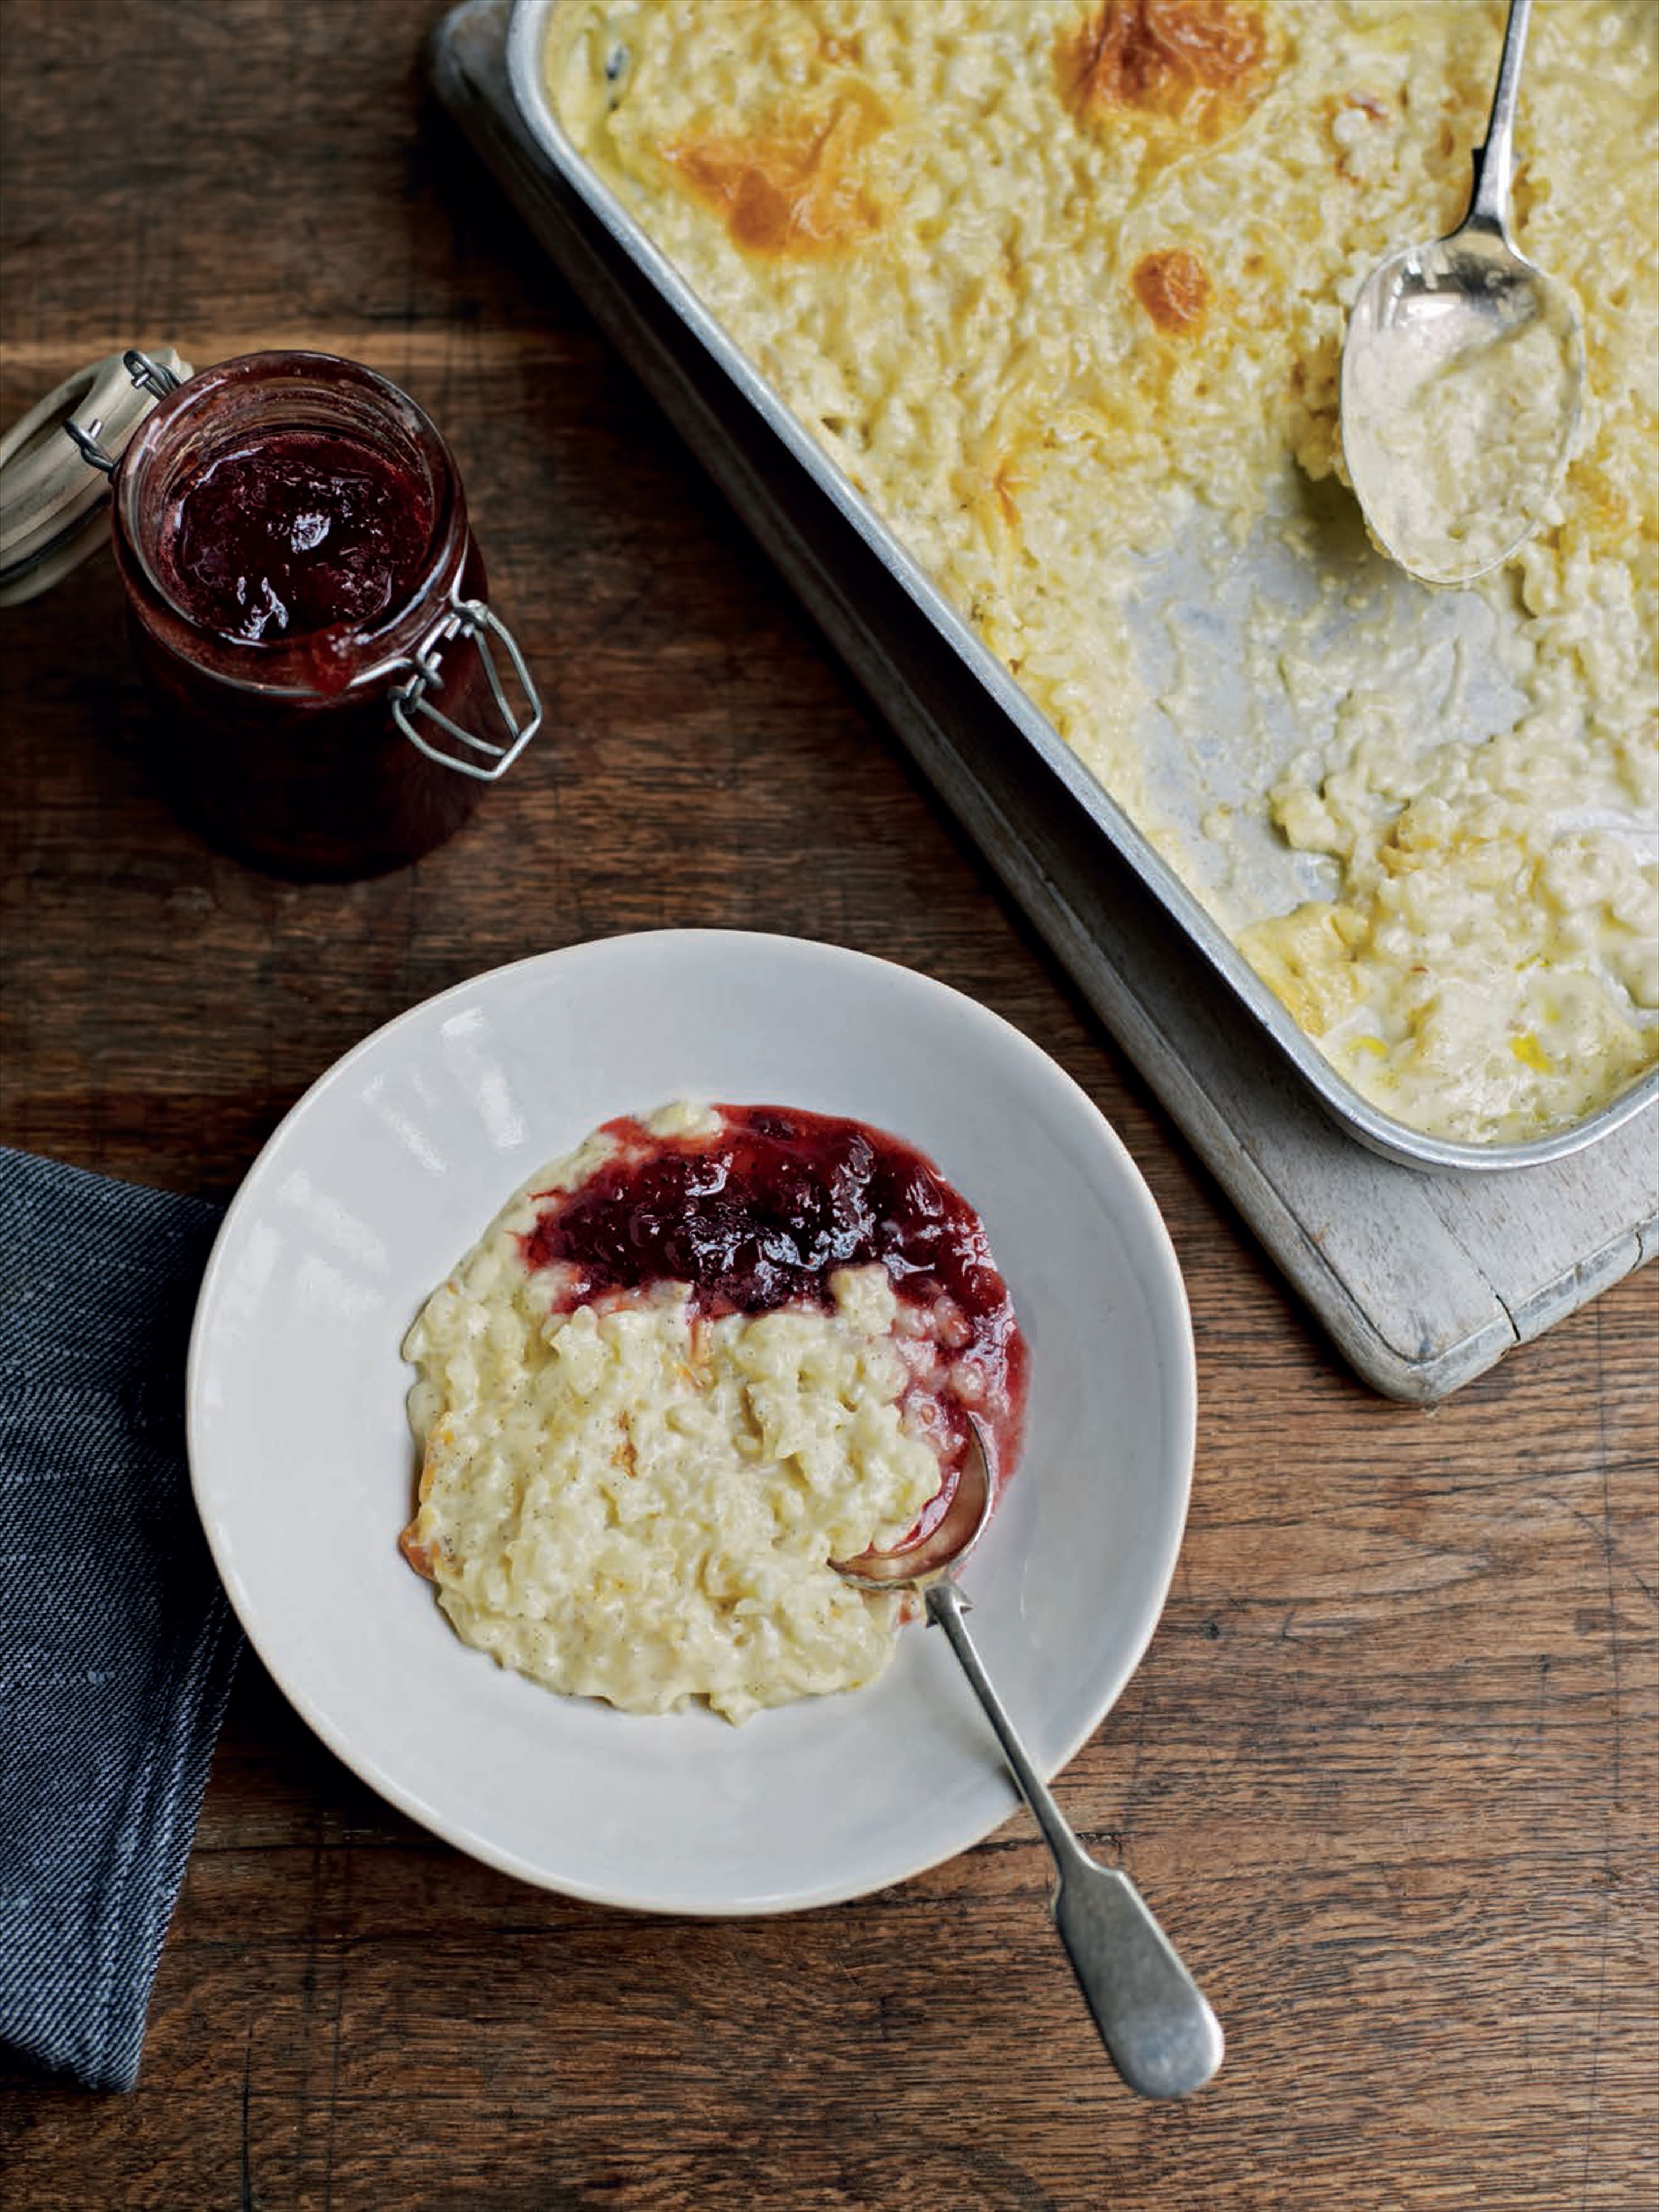 Baked rice pudding with quick strawberry jam